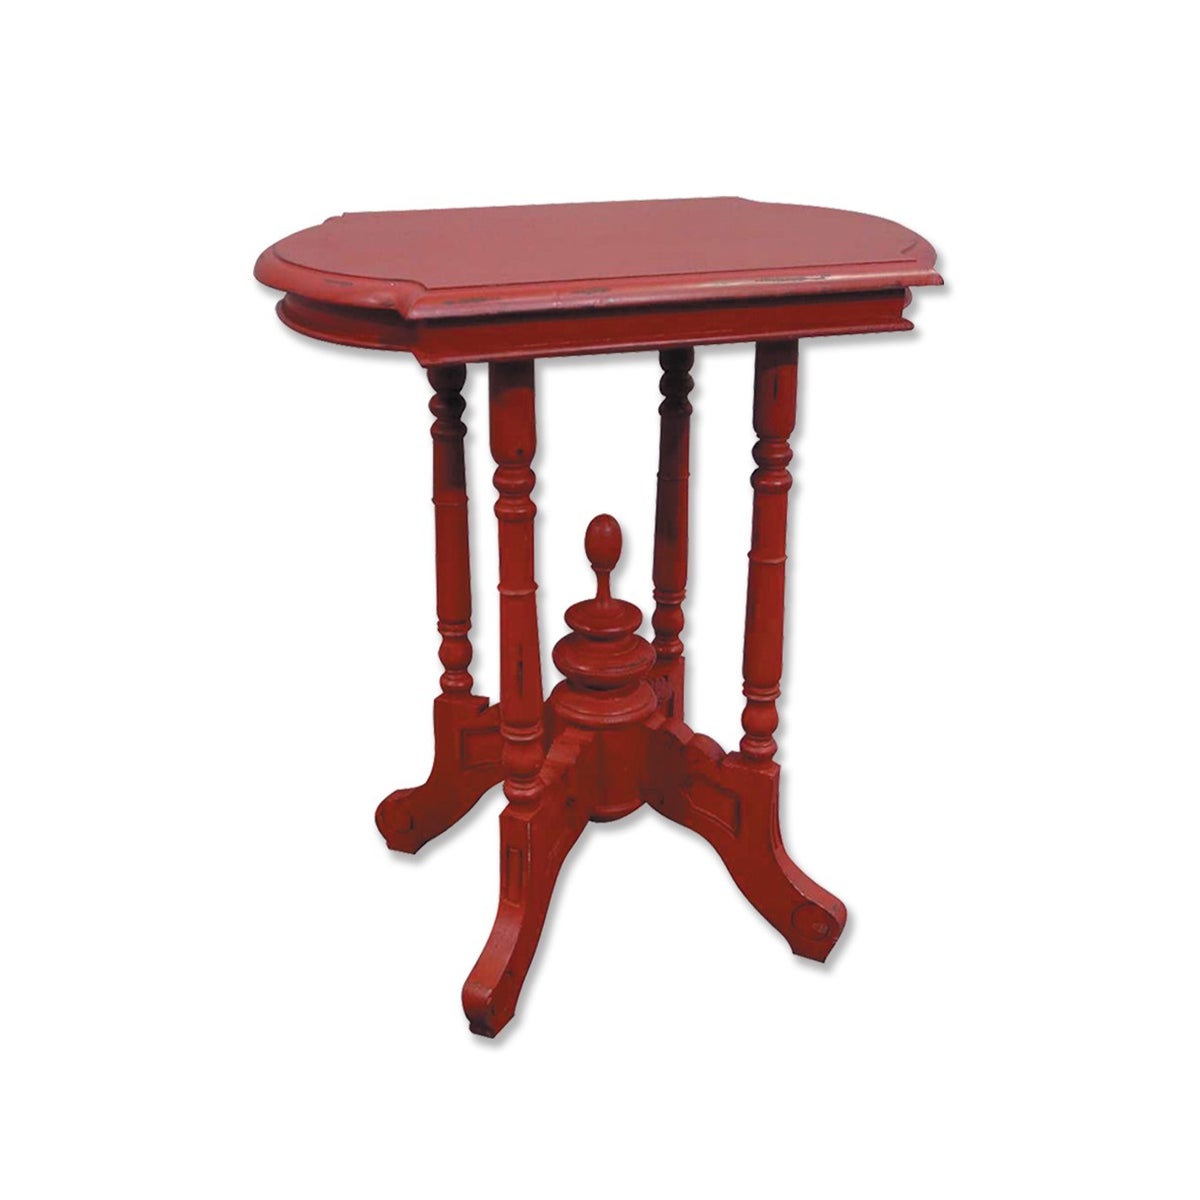 VICTORIAN SIDE TABLE - RED